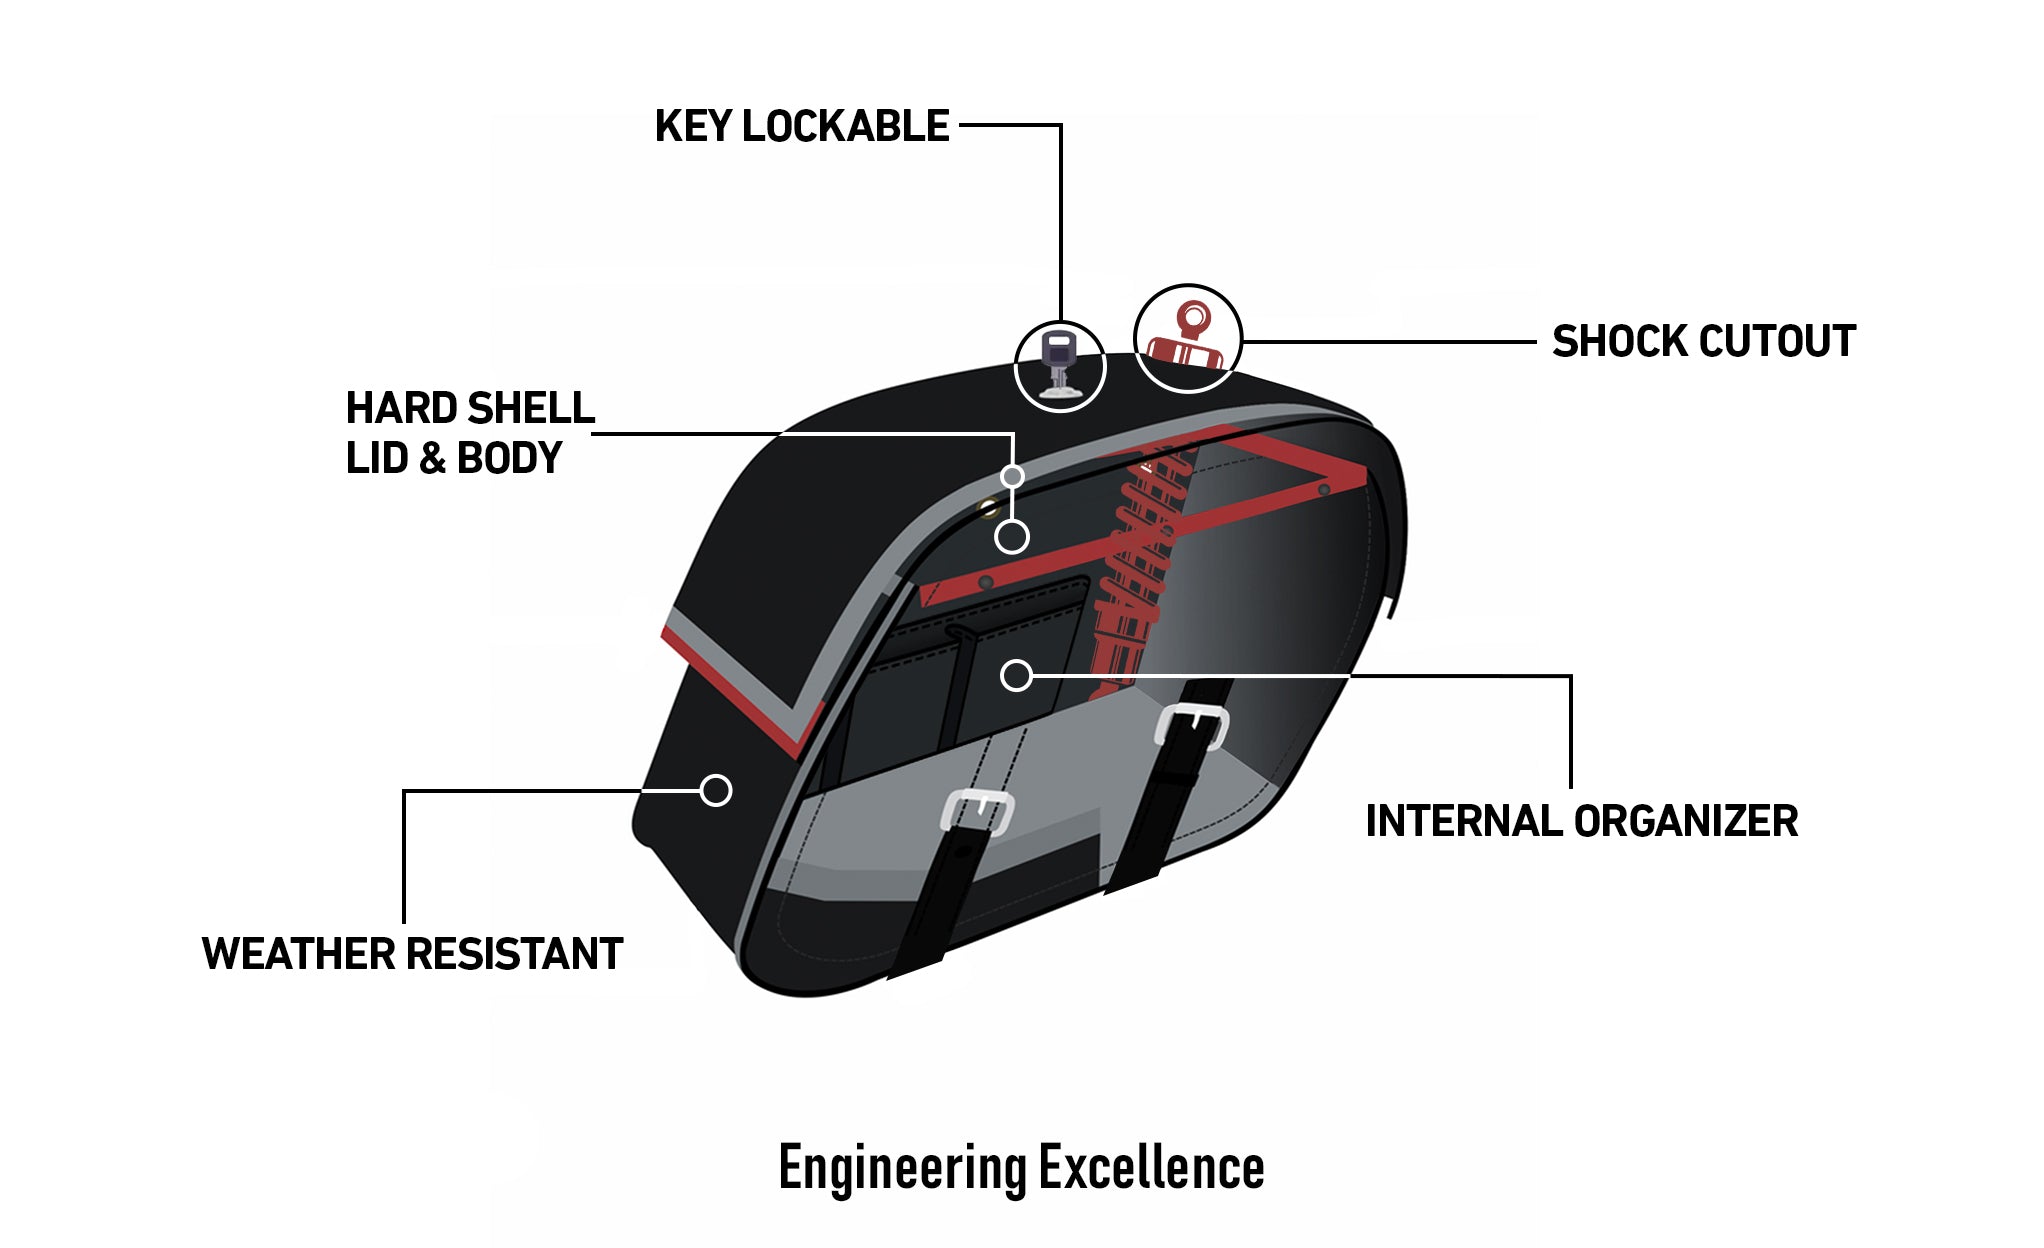 Viking Raven Extra Large Honda Vtx 1800 N Shock Cut Out Leather Motorcycle Saddlebags Engineering Excellence with Bag on Bike @expand